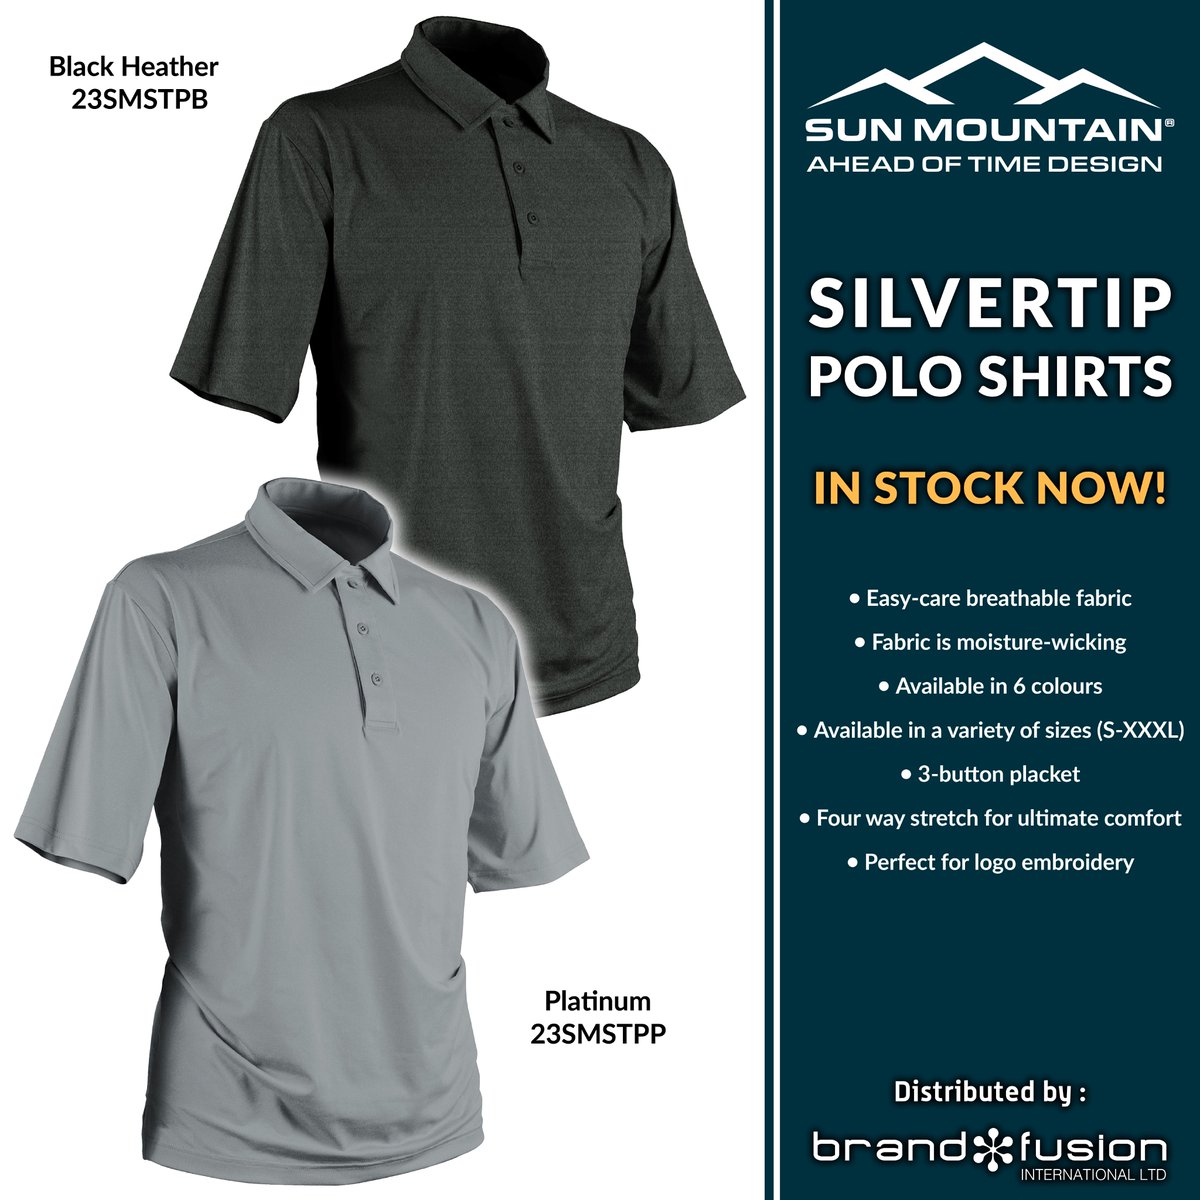 Silvertip Polo shirts from Sun Mountain
In stock now in 6 colours - The perfect shirt for embroidery with your club logo
- Easy-care, breathable, moisture-wicking fabric
- Four way stretch for ultimate comfort
#sunmountain #polo #poloshirt #golfshirt #embroidery #golf #ukgolf